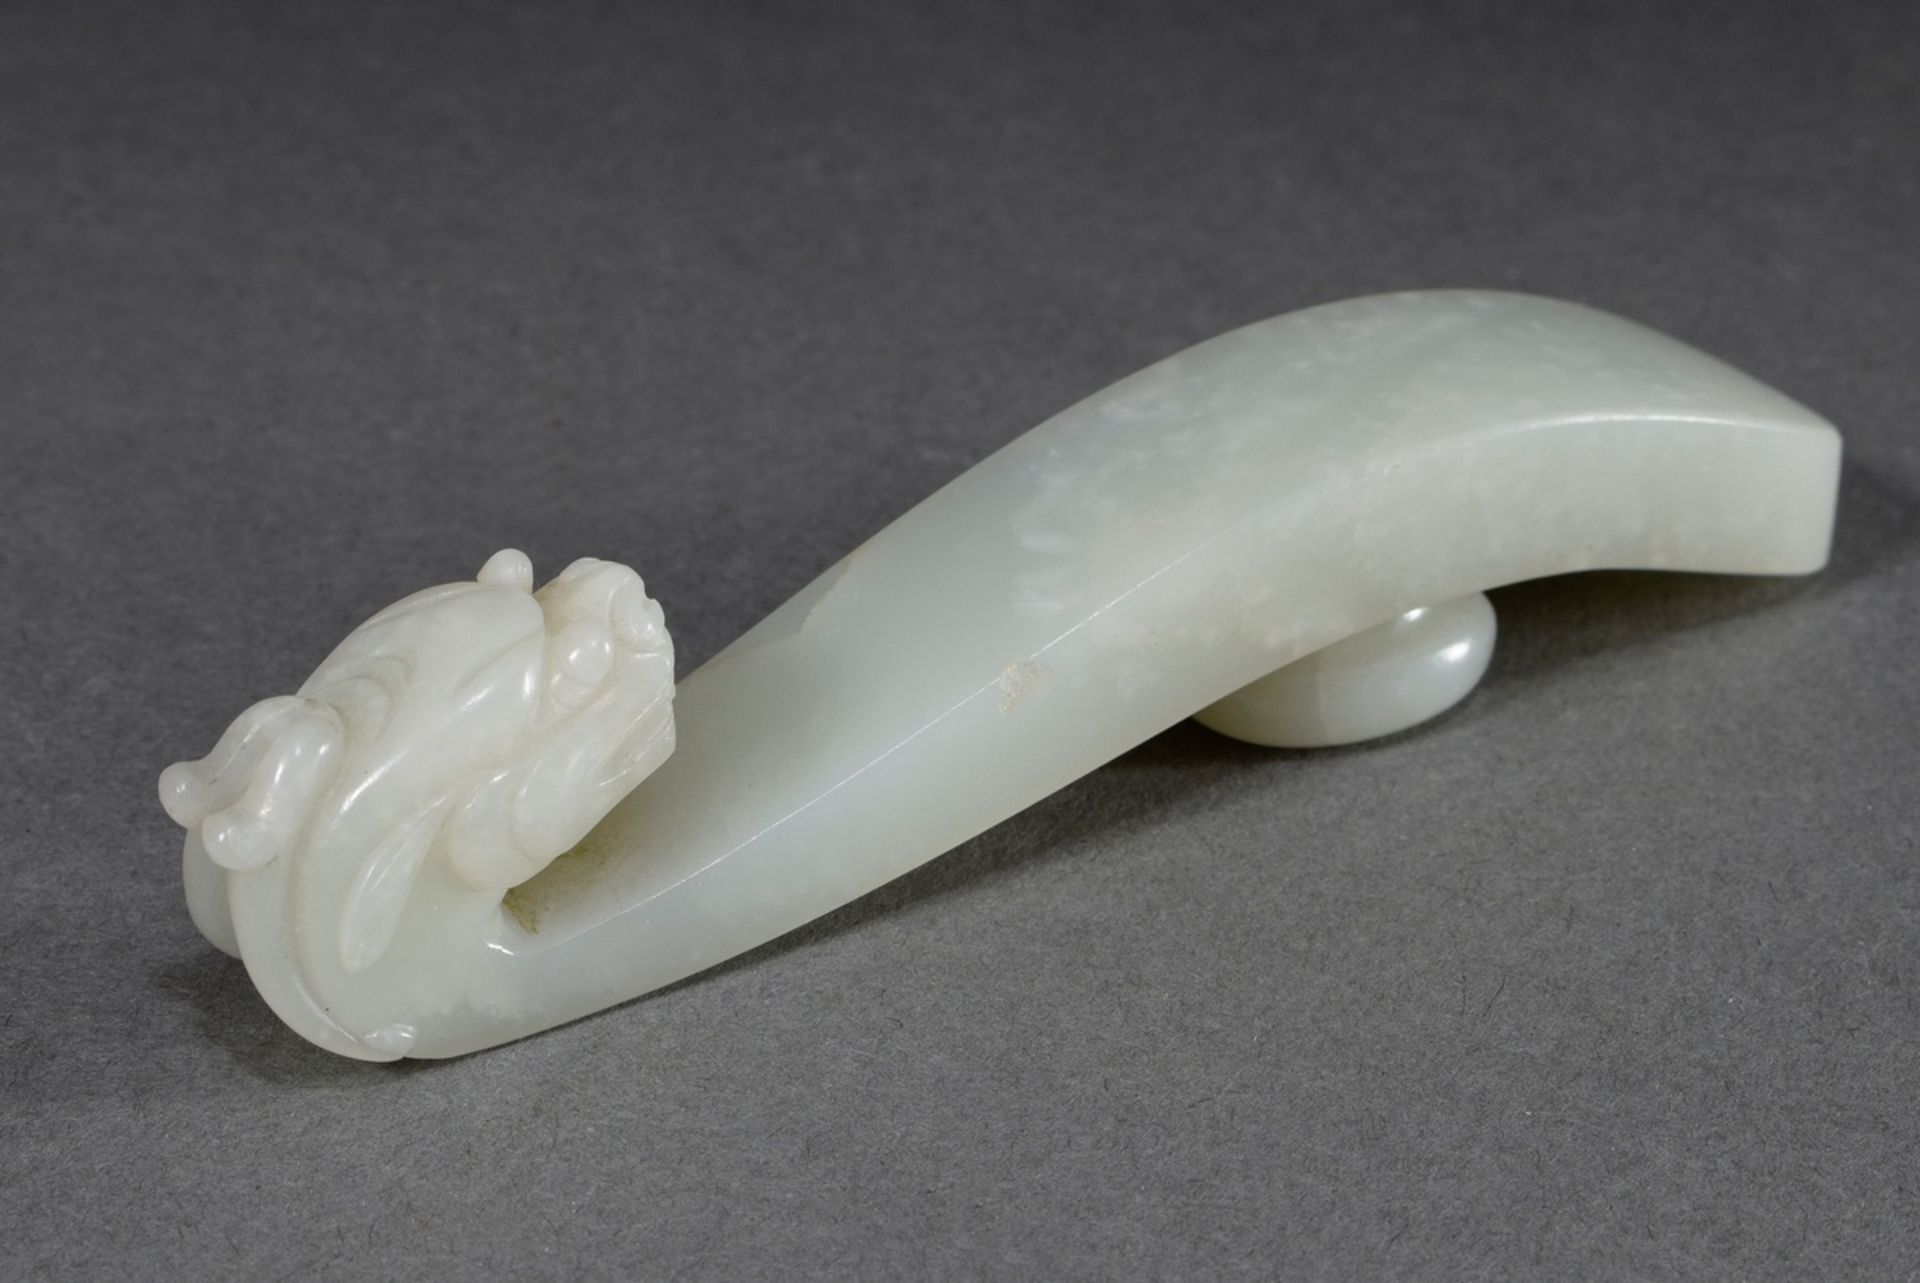 Carved jade belt buckle "Dragon", China, 2x11,5cm, min. bumped - Image 3 of 3